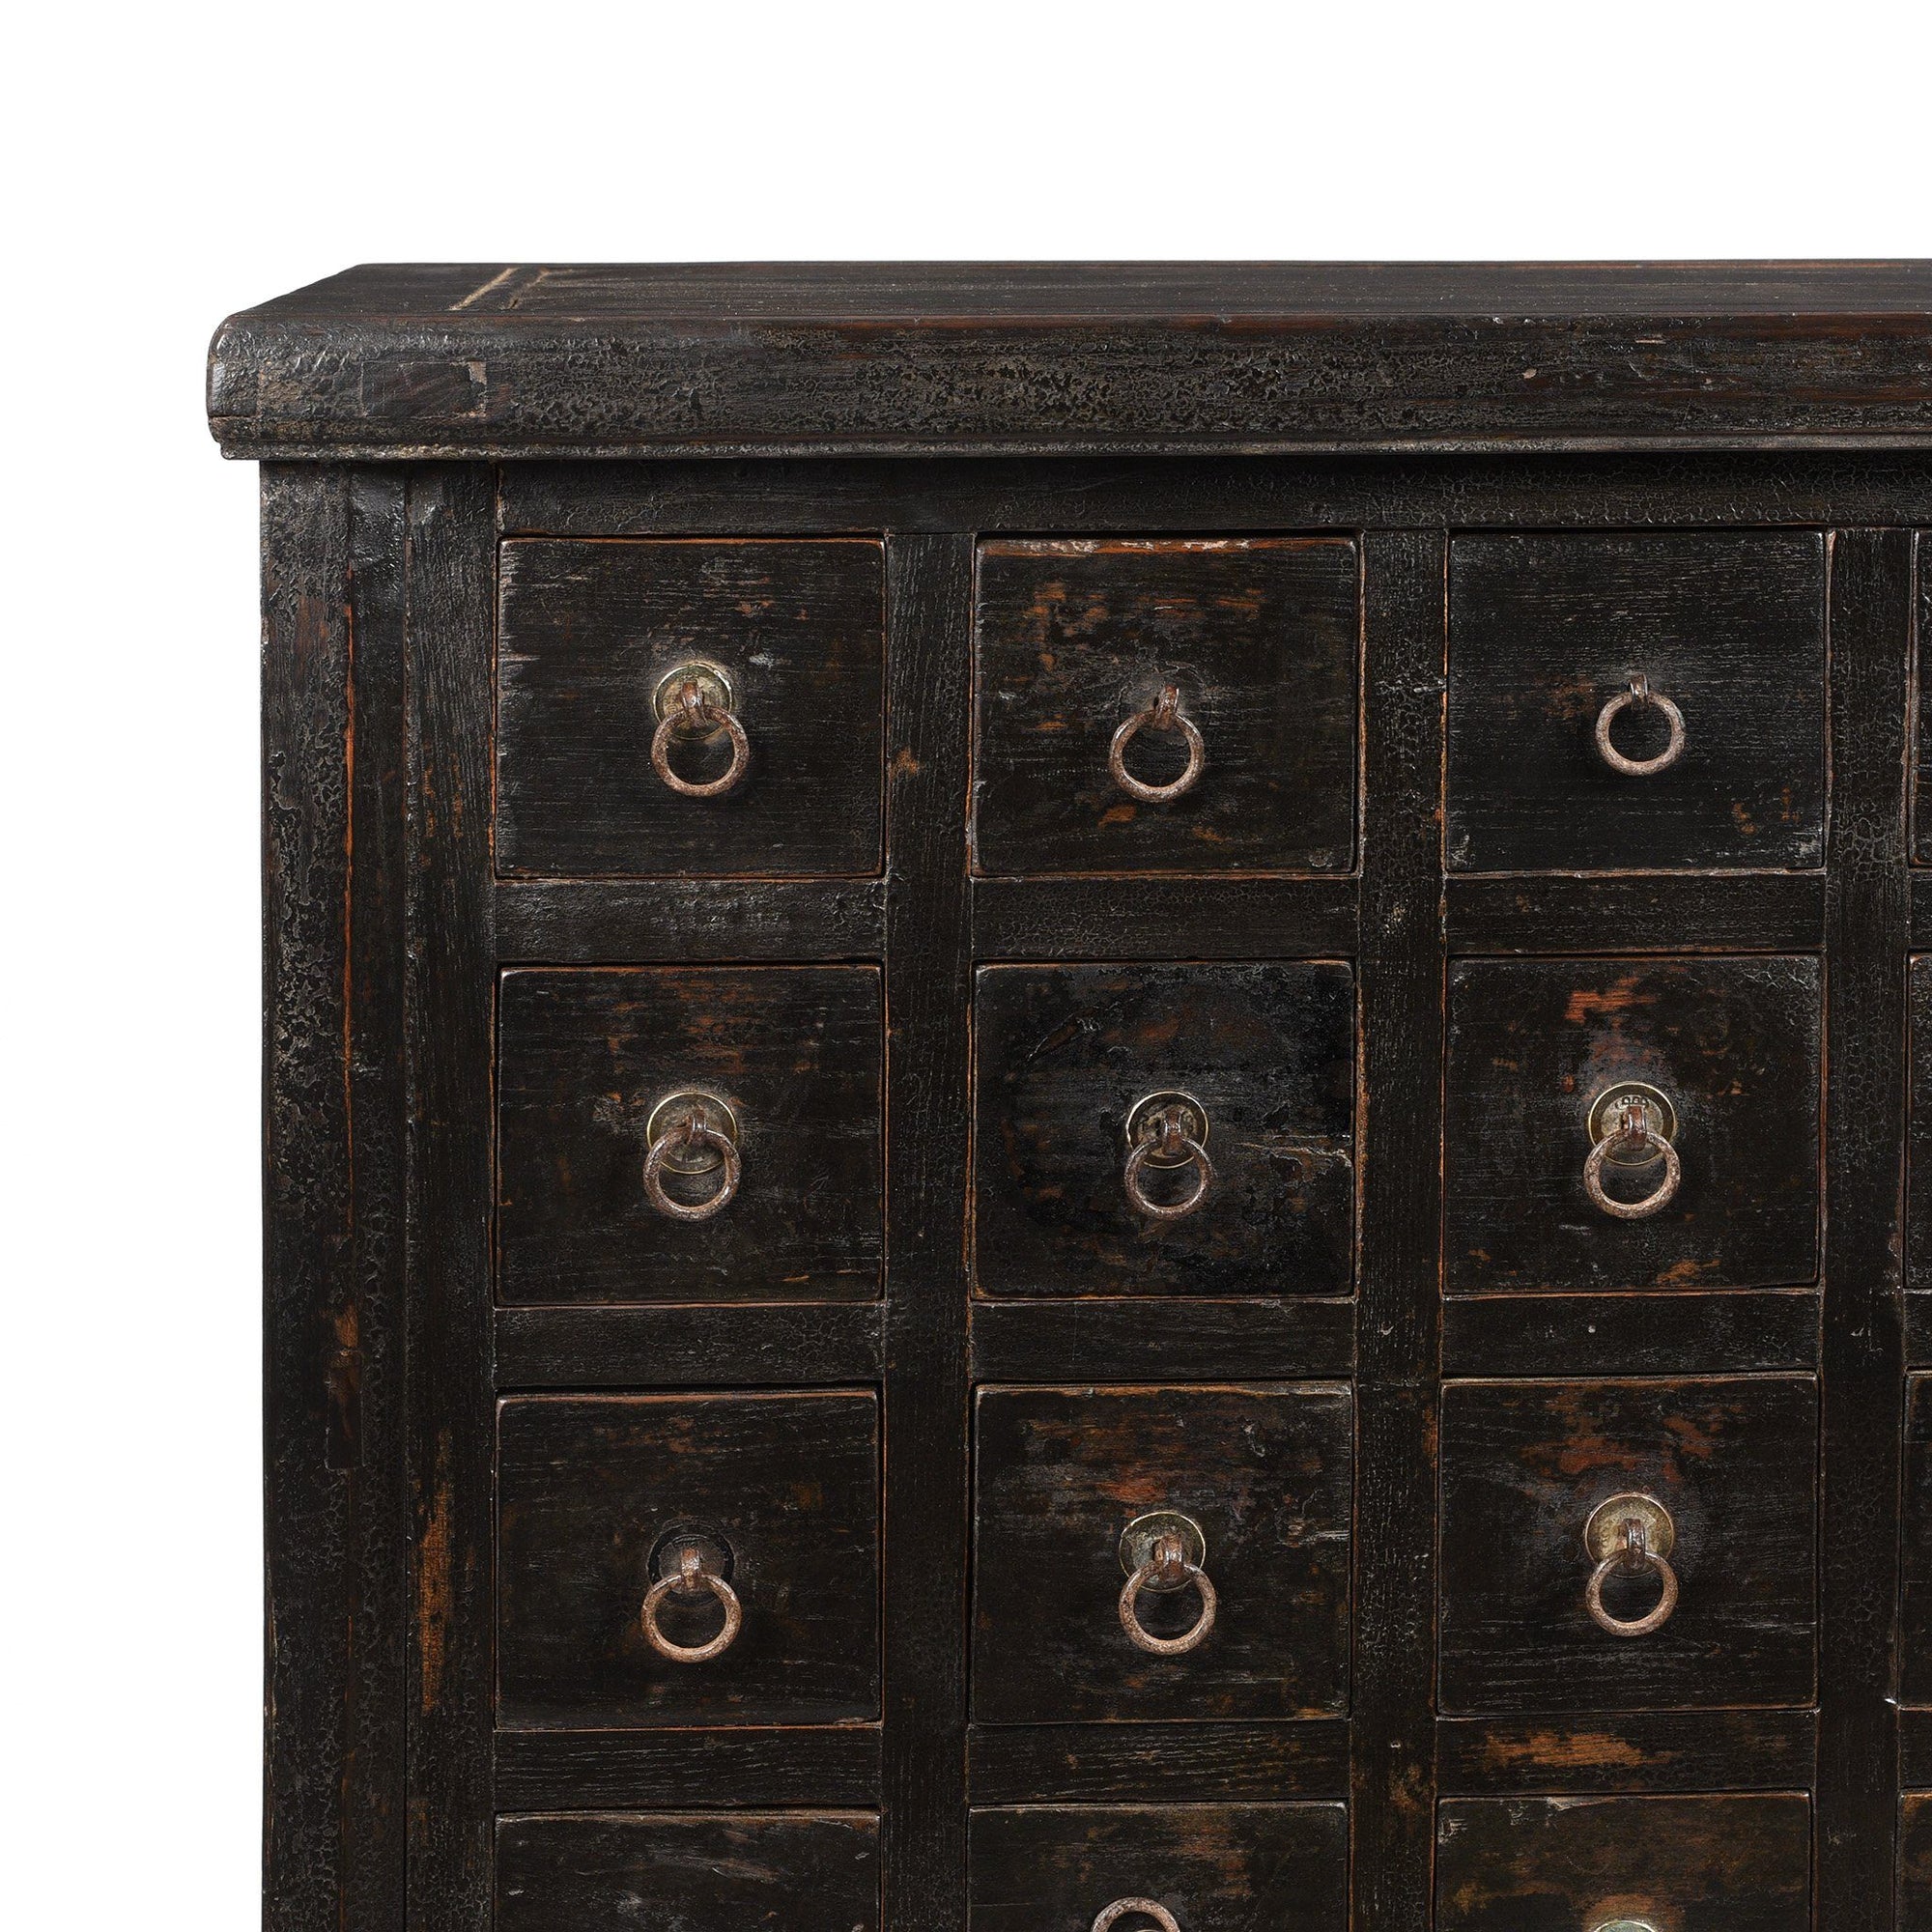 Black Painted Apothecary Chest From Shanxi - 19thC | Indigo Antiques